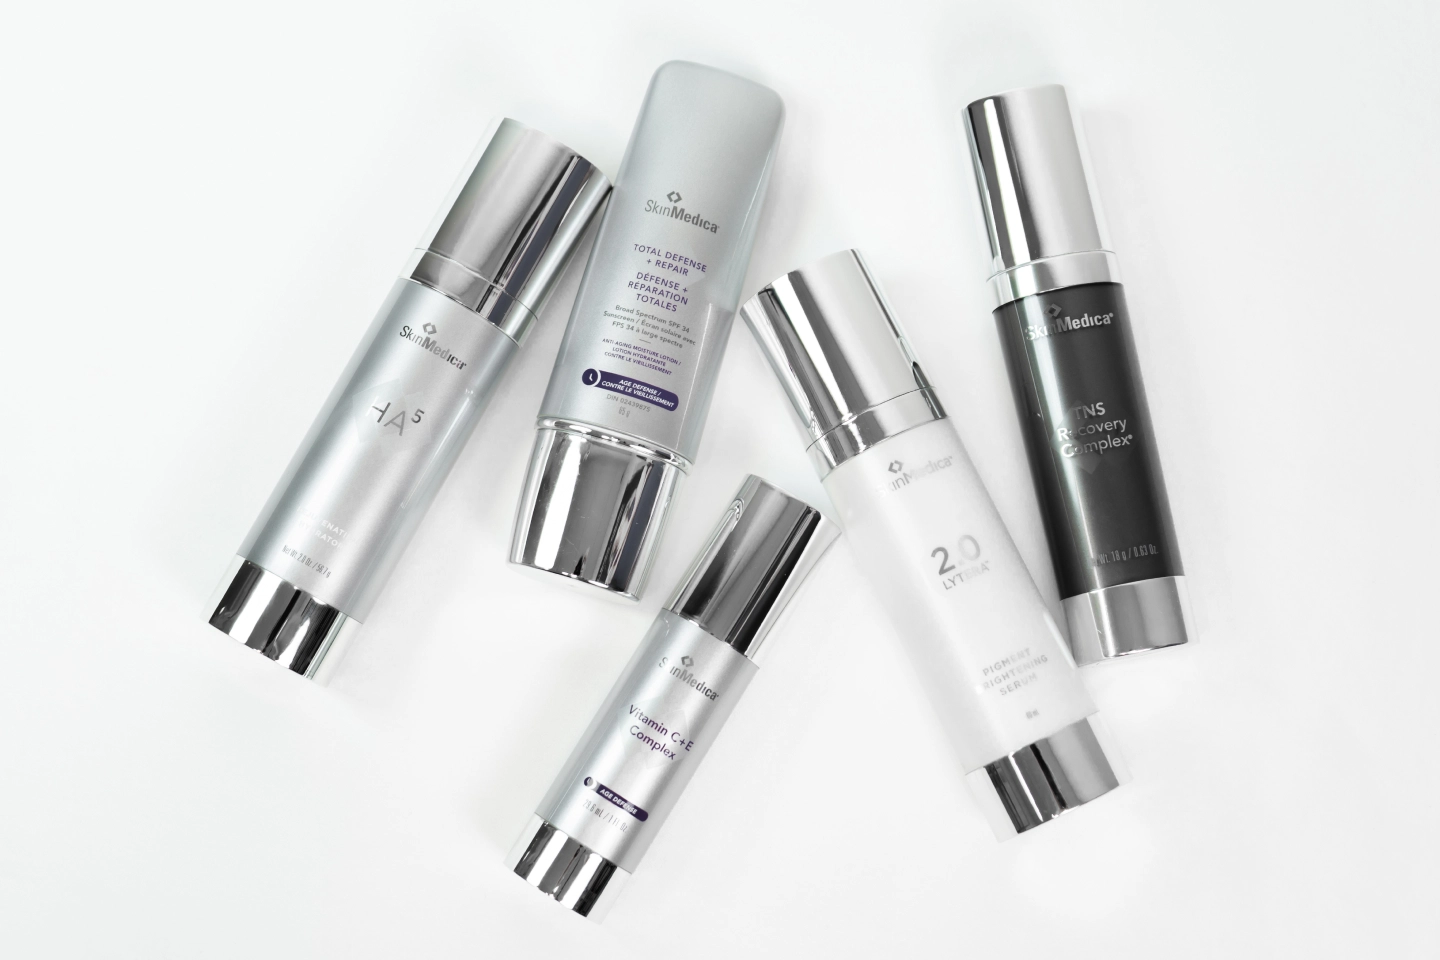 WPAC are happy to provide a variety of Skin Medica products